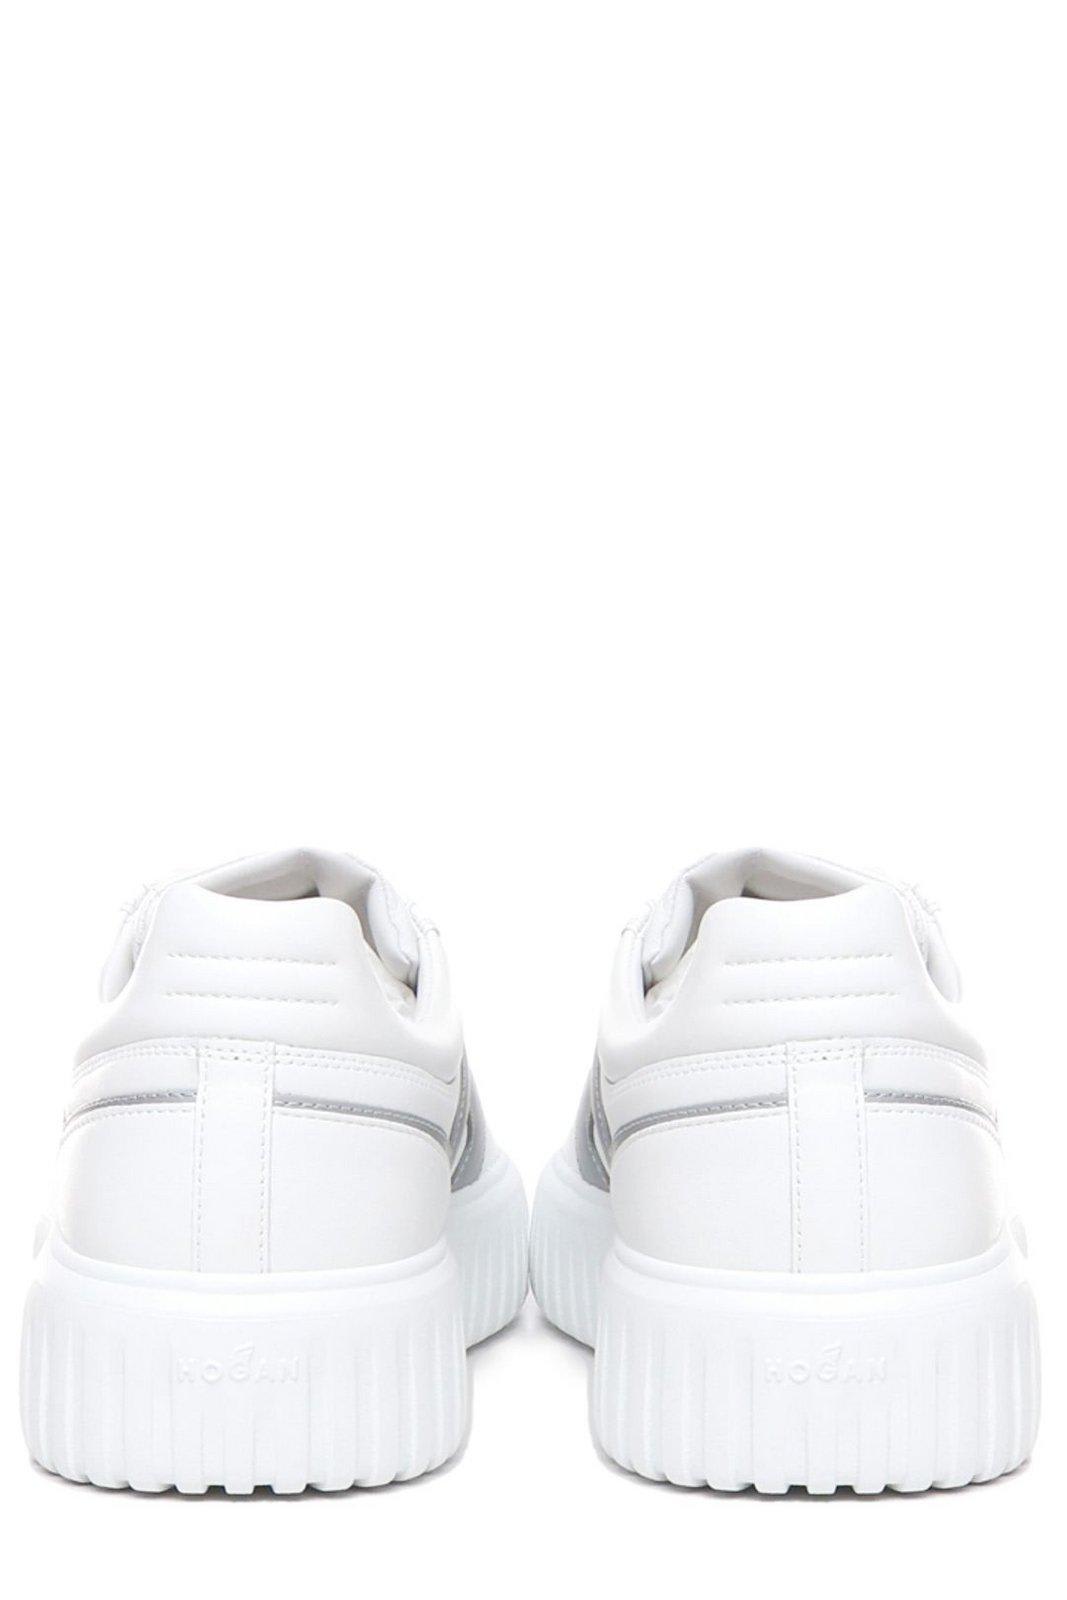 Shop Hogan H-stripes Round Toe Sneakers In White